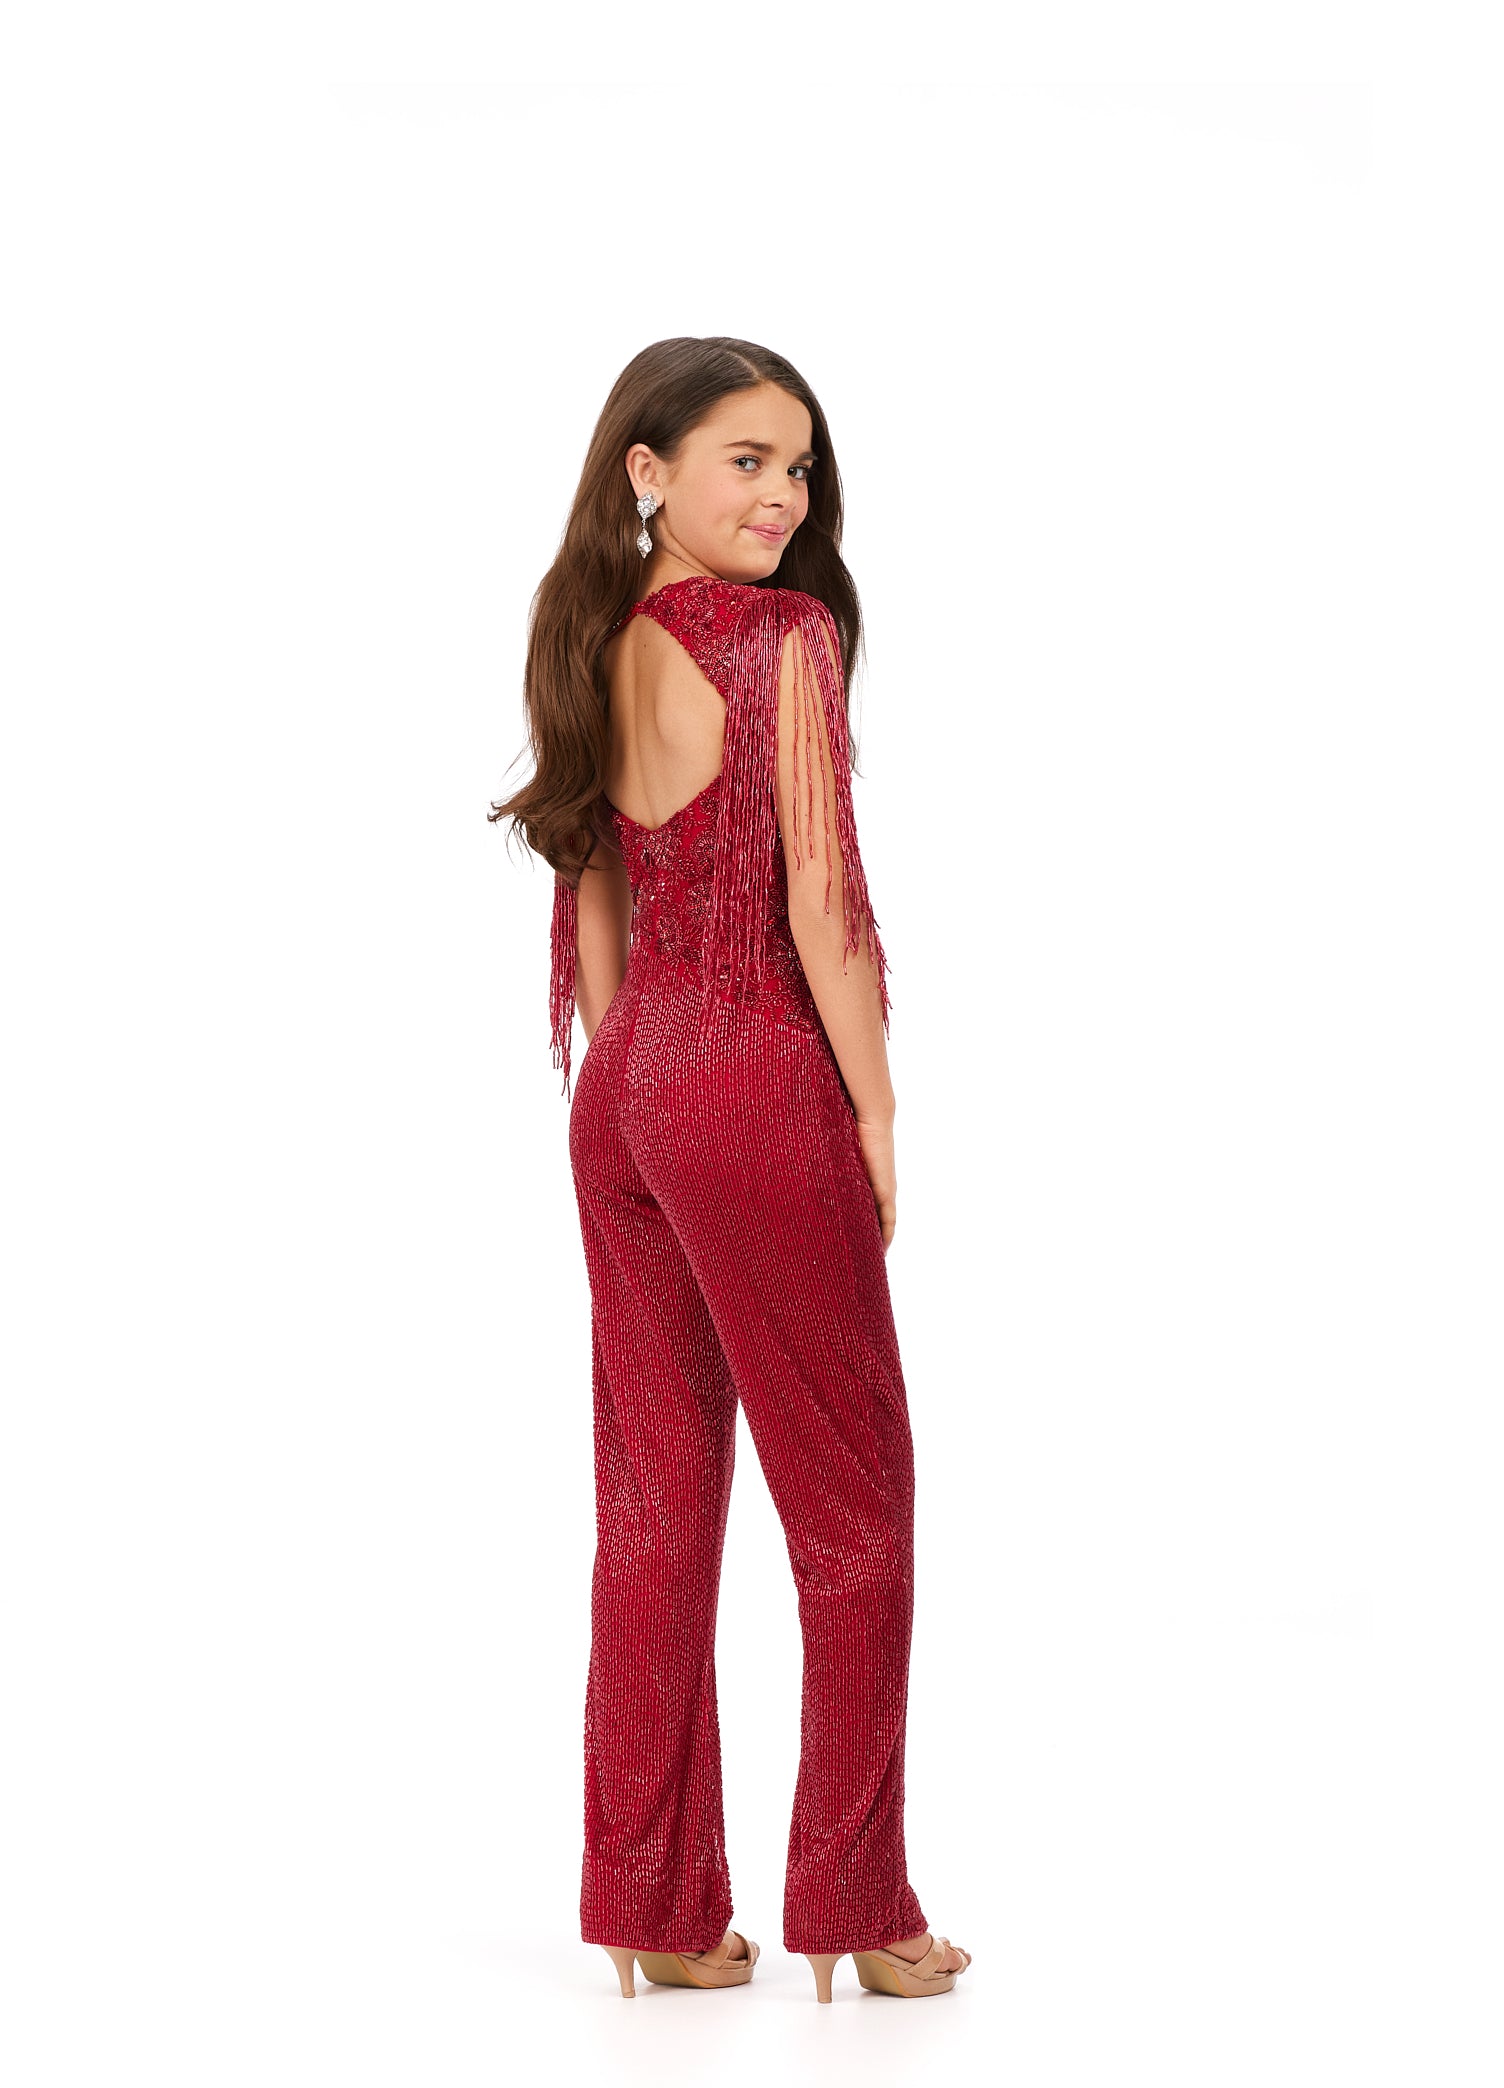 Ashley Lauren Kids 8193 Liquid Beaded Crew Neckline With Fringe Sleeves Jumpsuit. This fully beaded jumpsuit is sure to make you stand out! From the high neckline to the fringe detailed shoulders, we give this a 10/10!